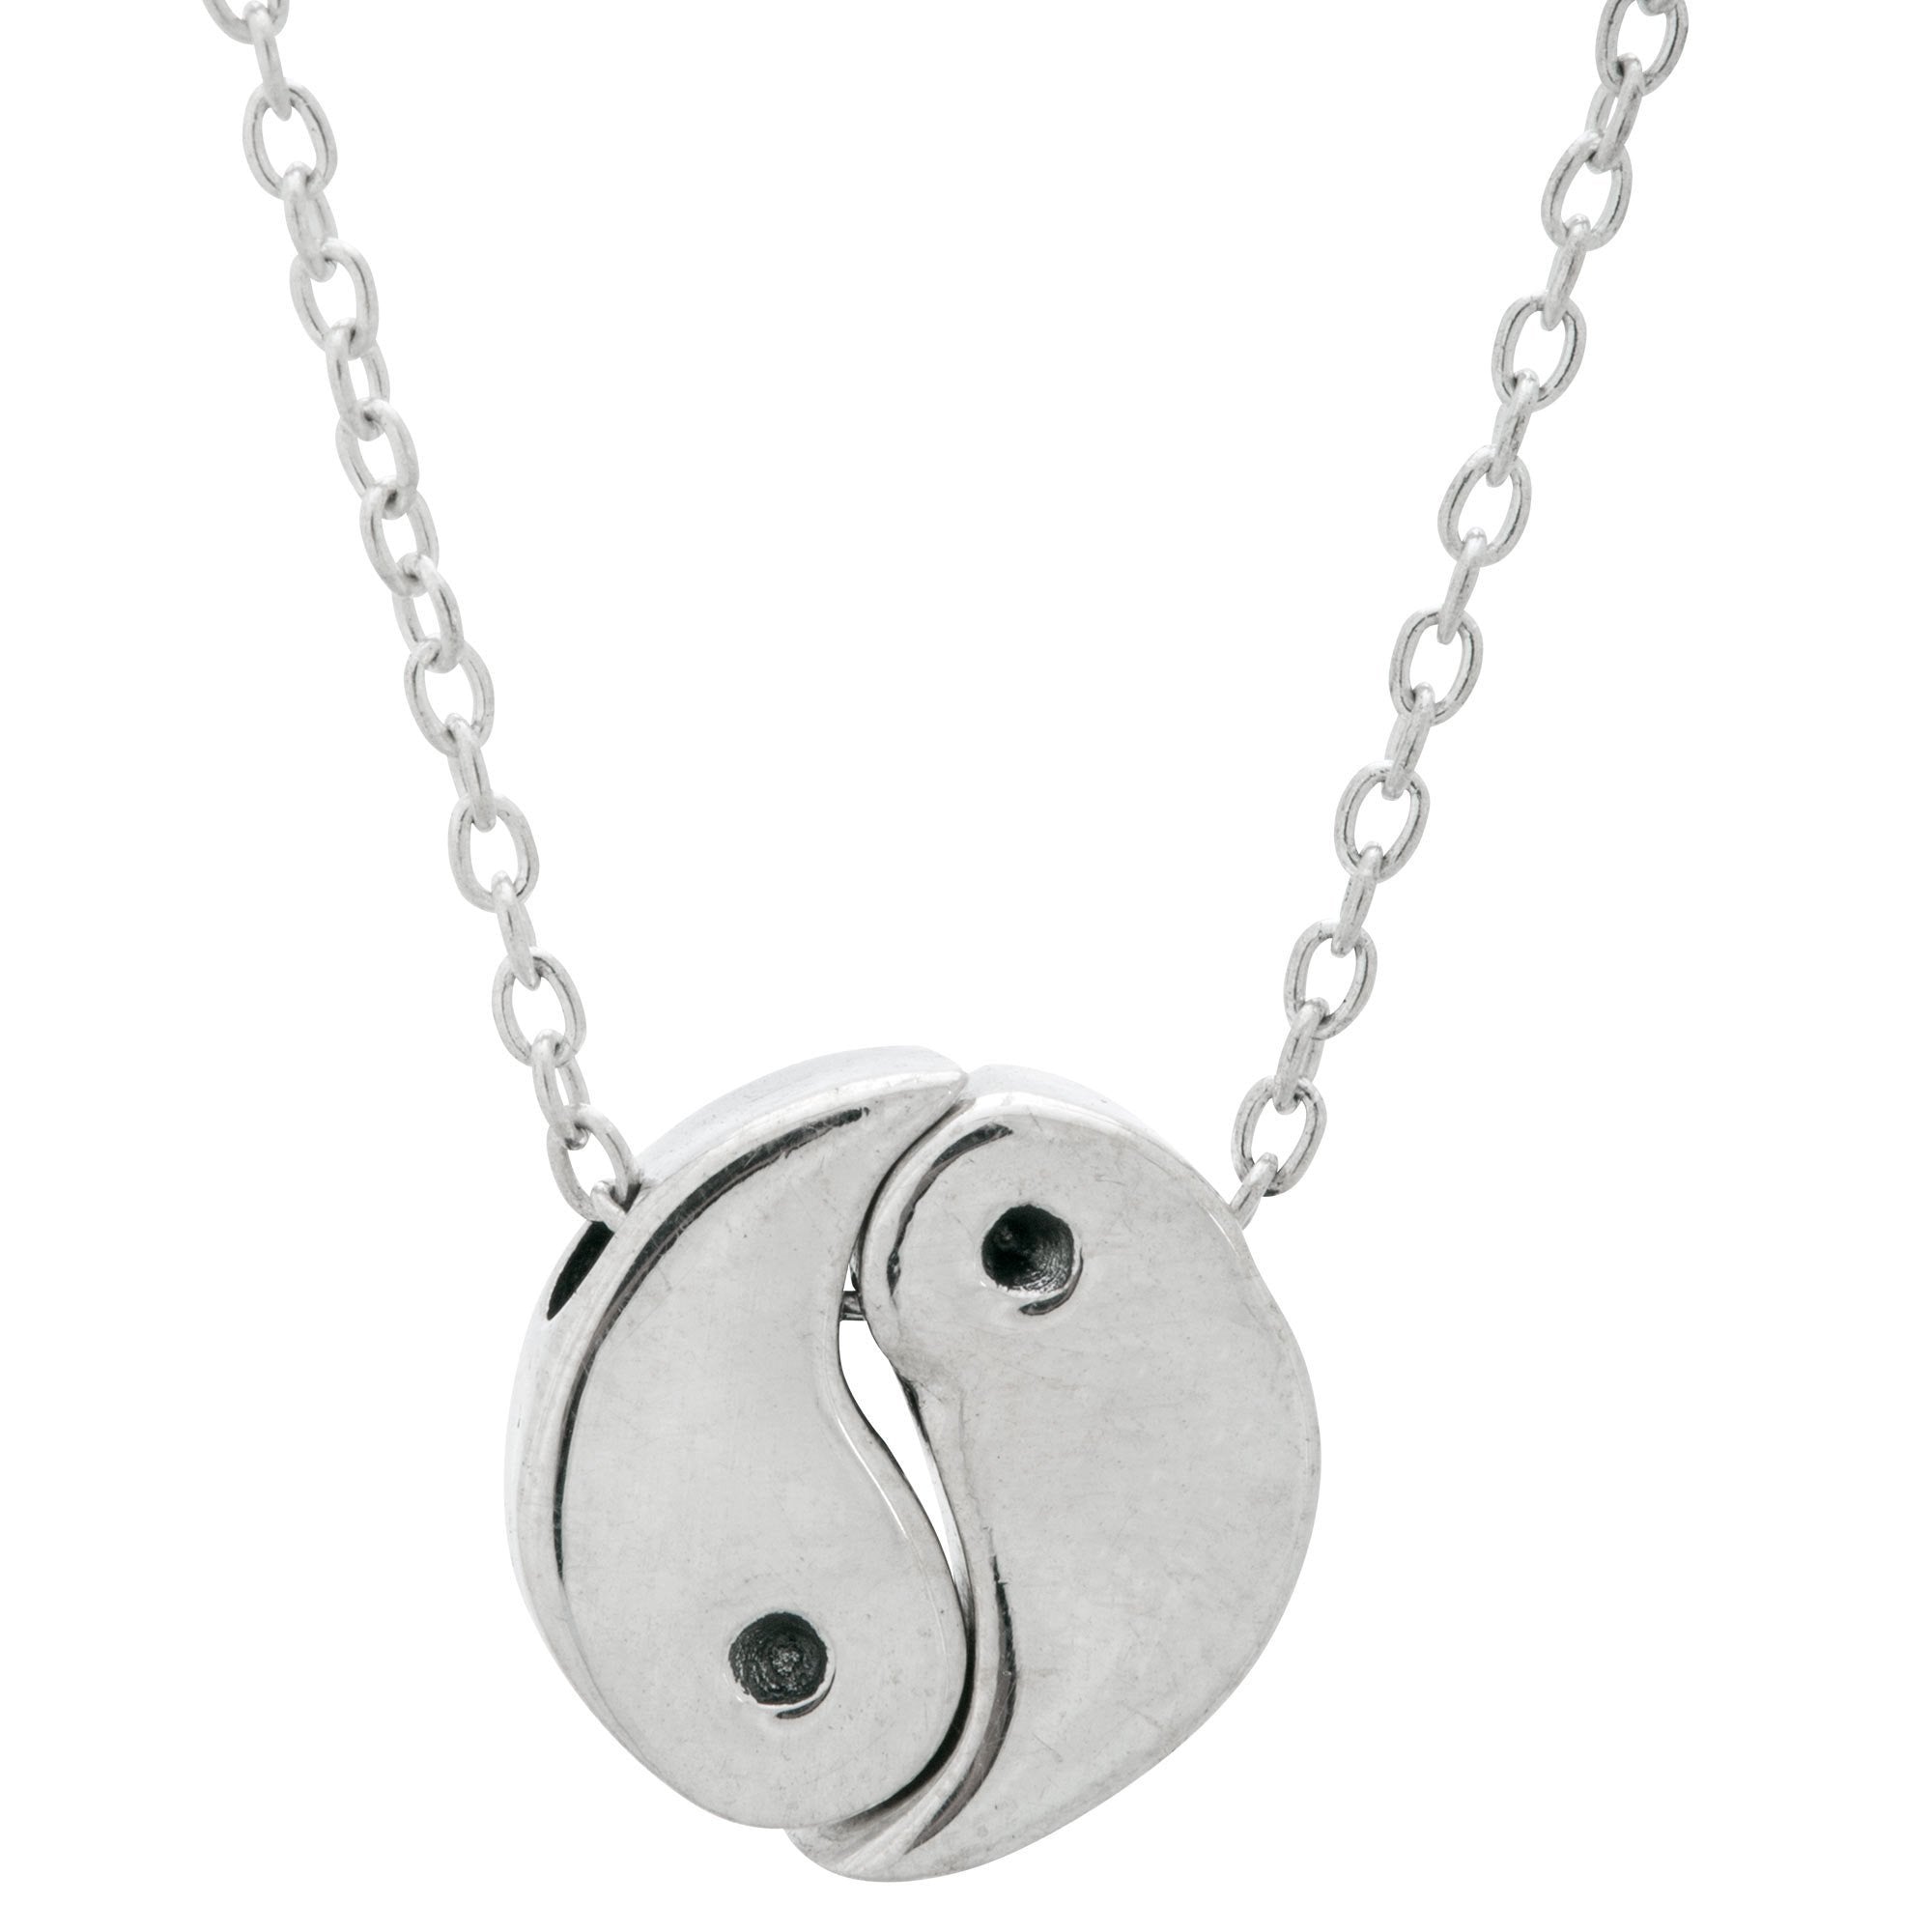 Mindful Living Sterling Necklace - You Complete Me